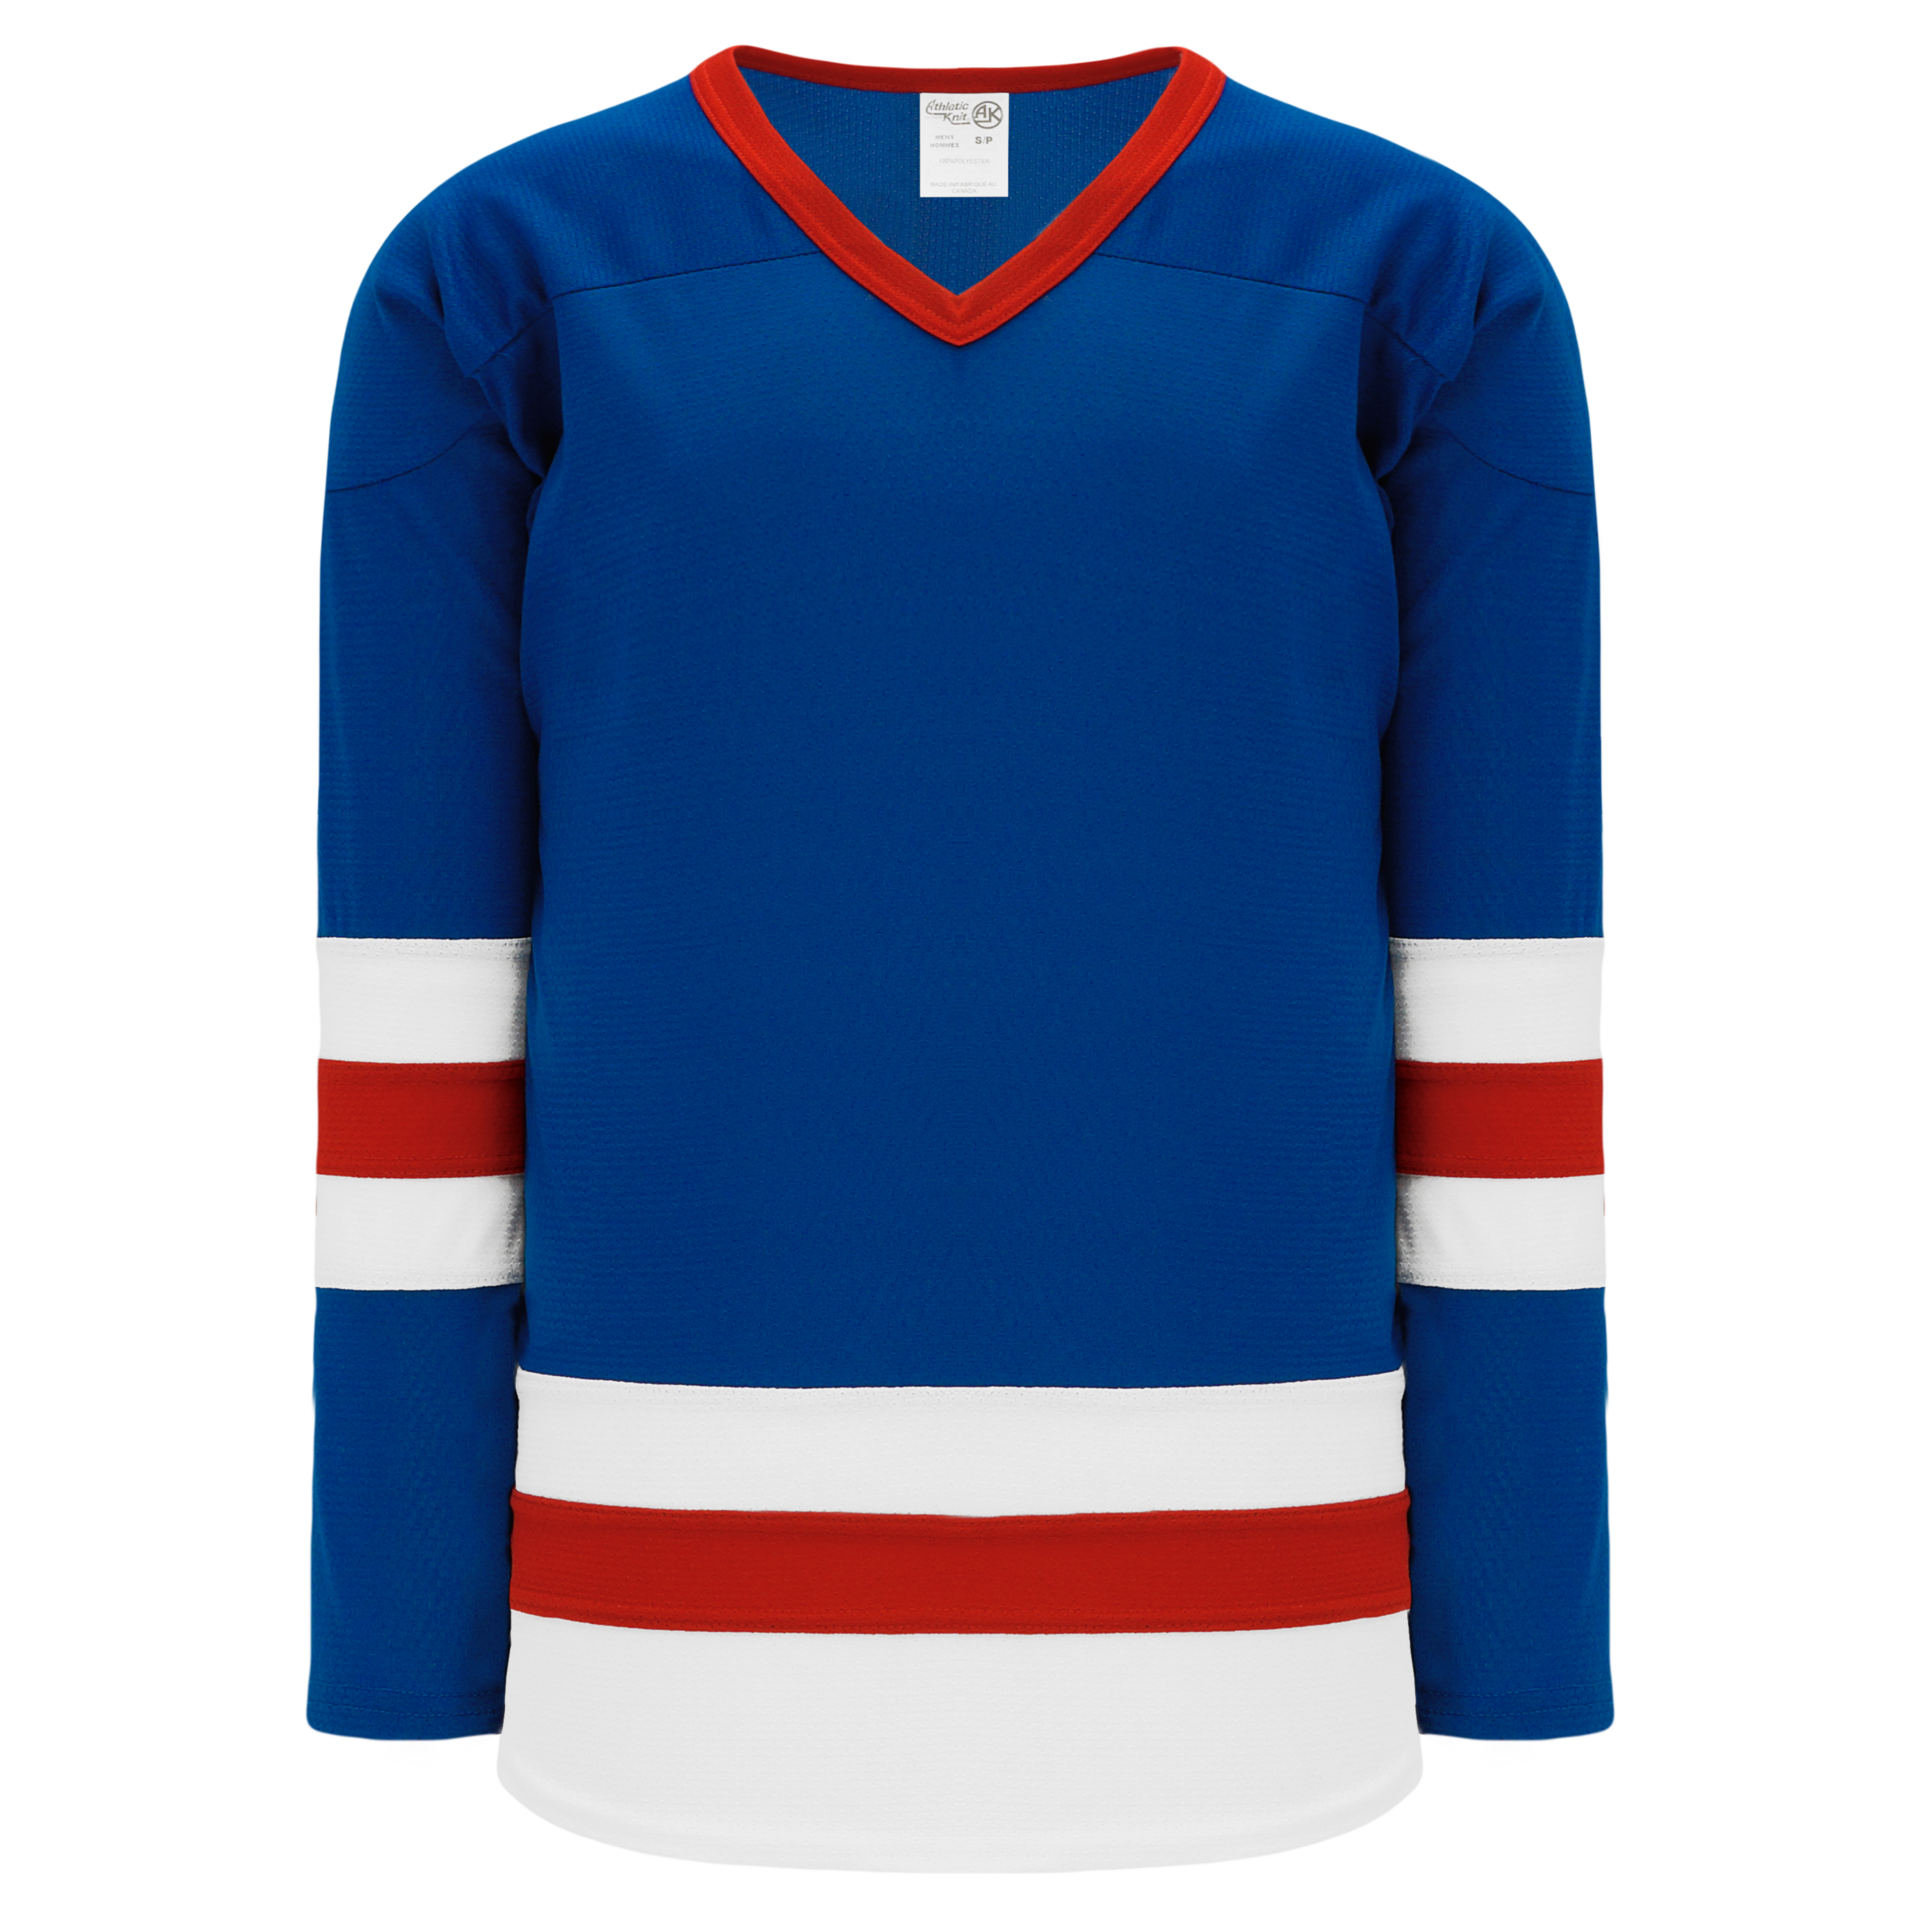 AthleticKnit: Customise online your hockey jerseys and team apparel